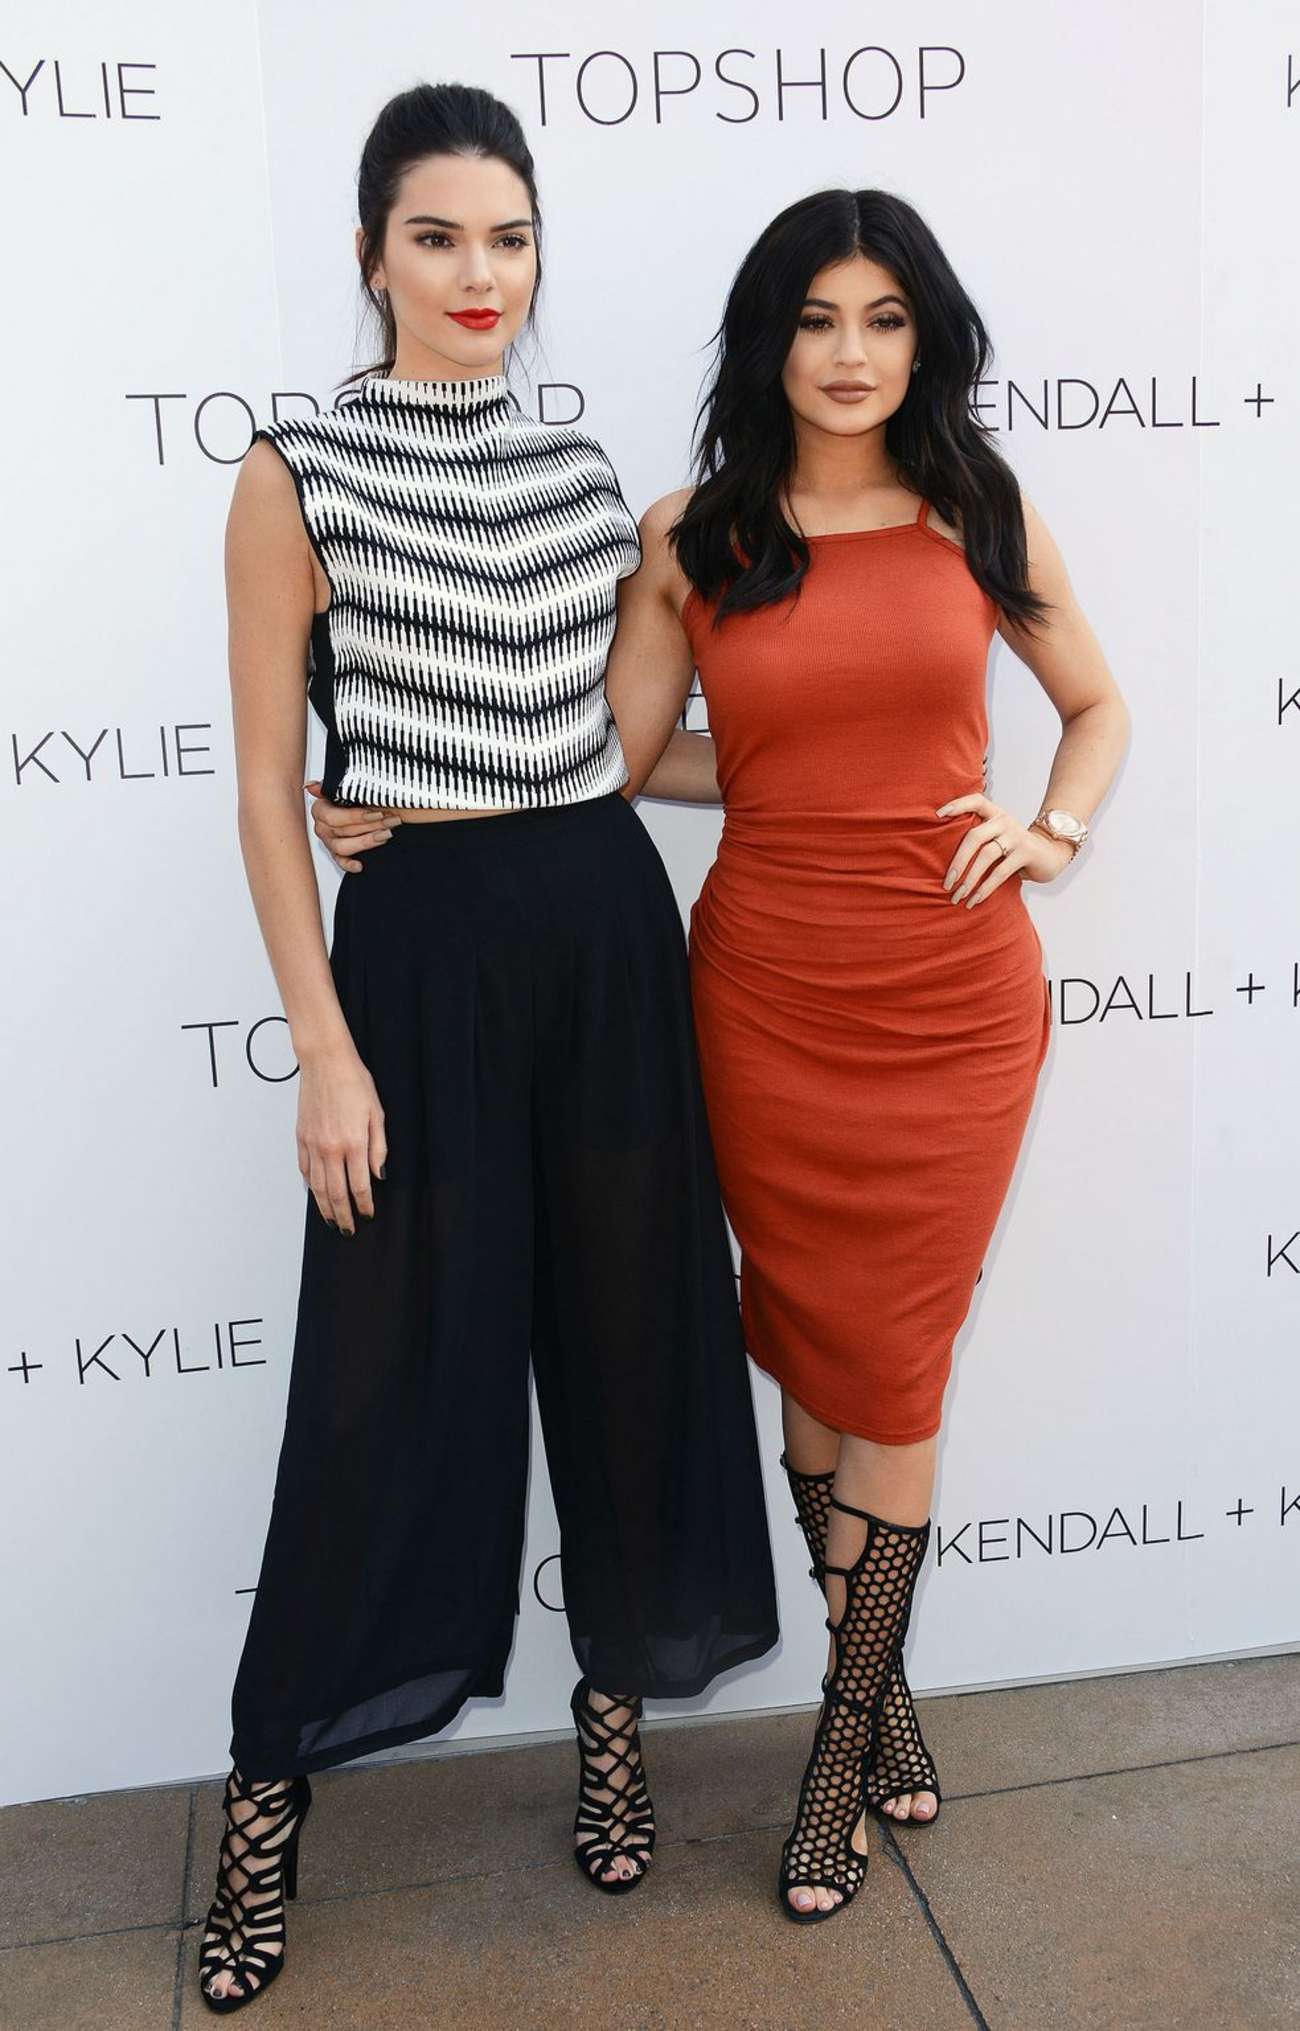 Kendall and Kylie Jenner – Kendall + Kylie Fashion Line ...